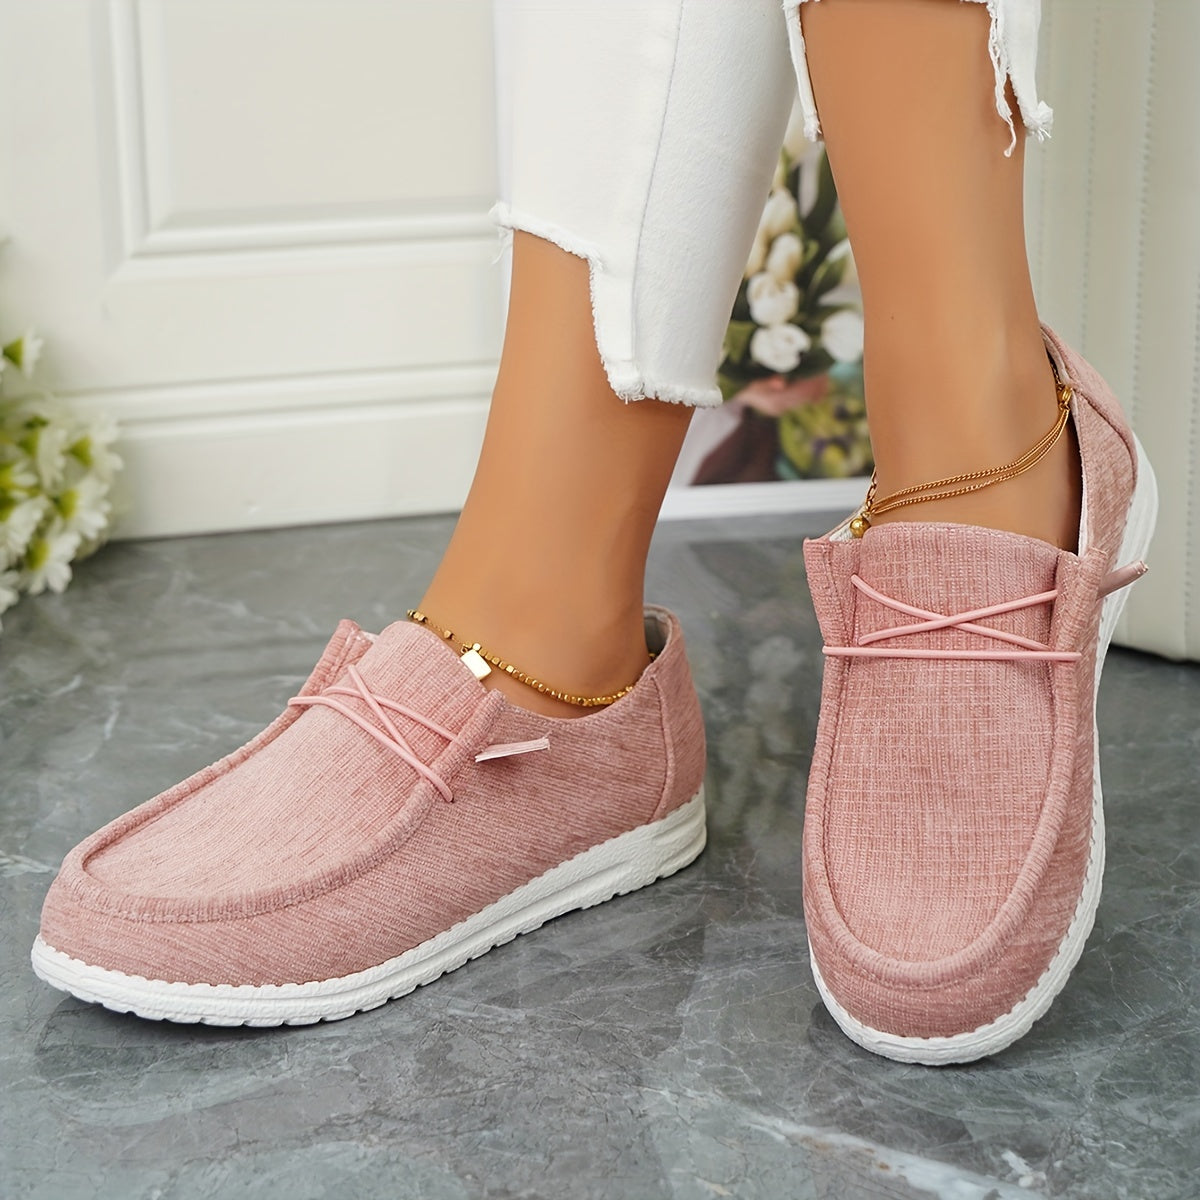 Simple Canvas Shoes, Casual Lace Up Low Top Sneakers